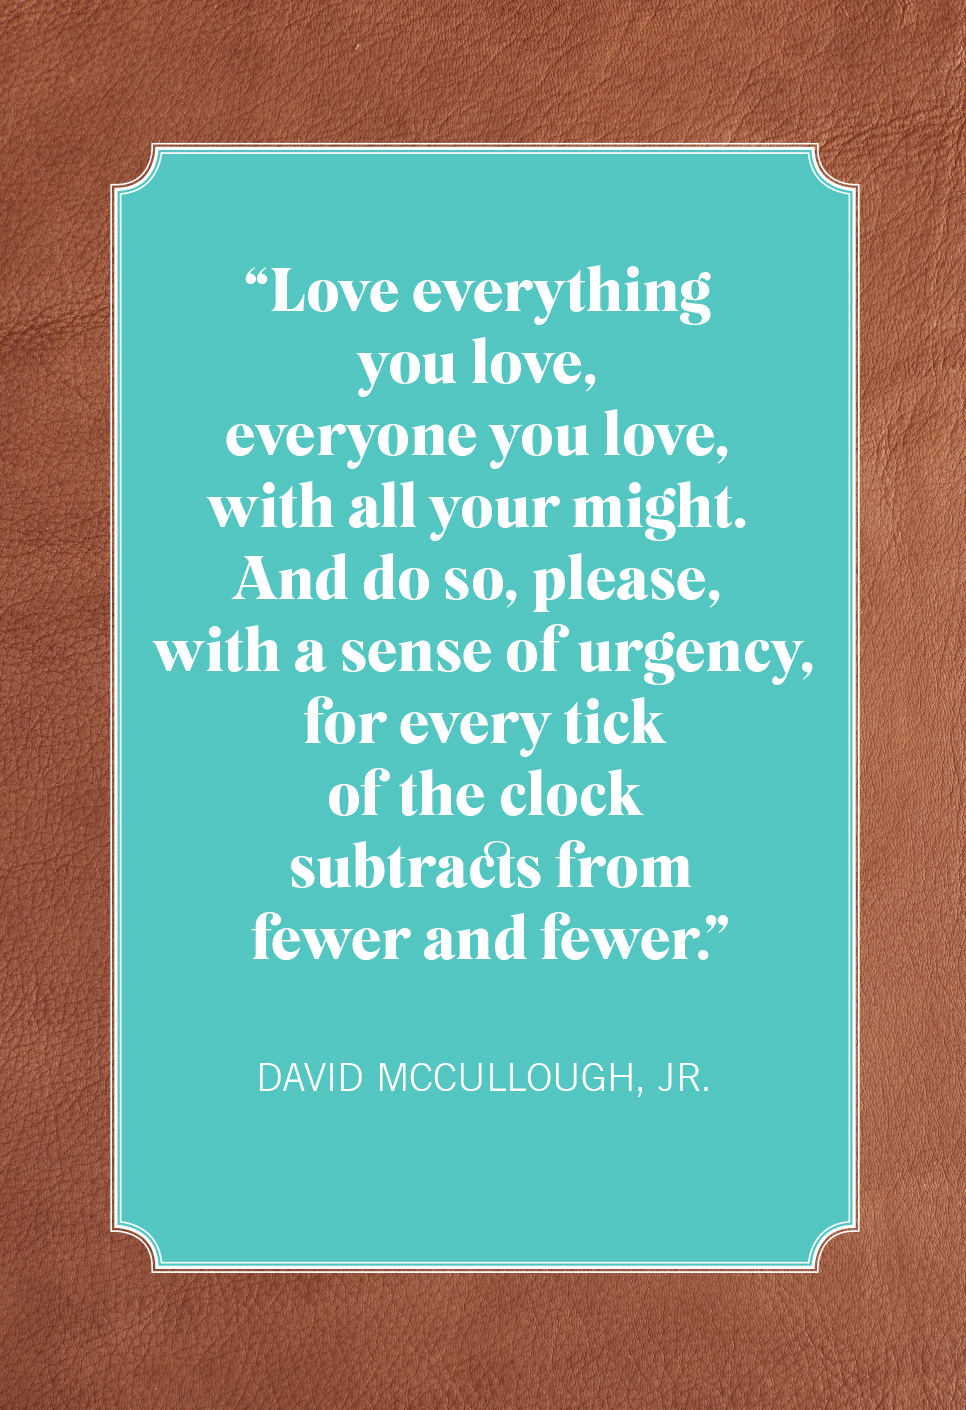 graduation quotes for sons david mccullough